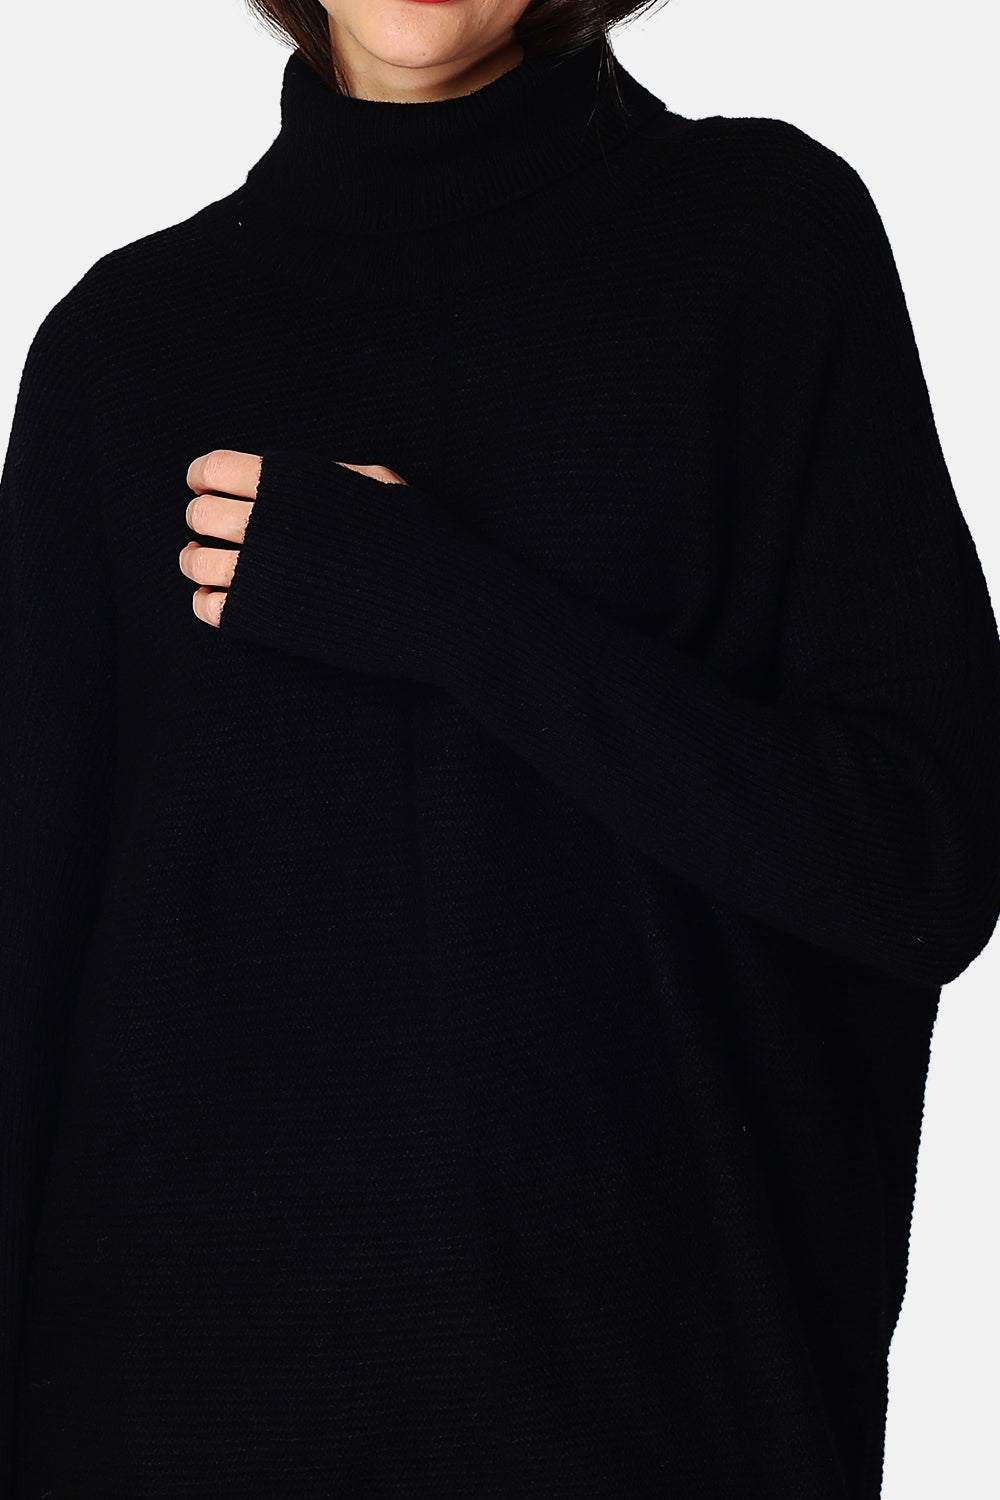 Asymmetrical turtleneck dress in English rib with long sleeves